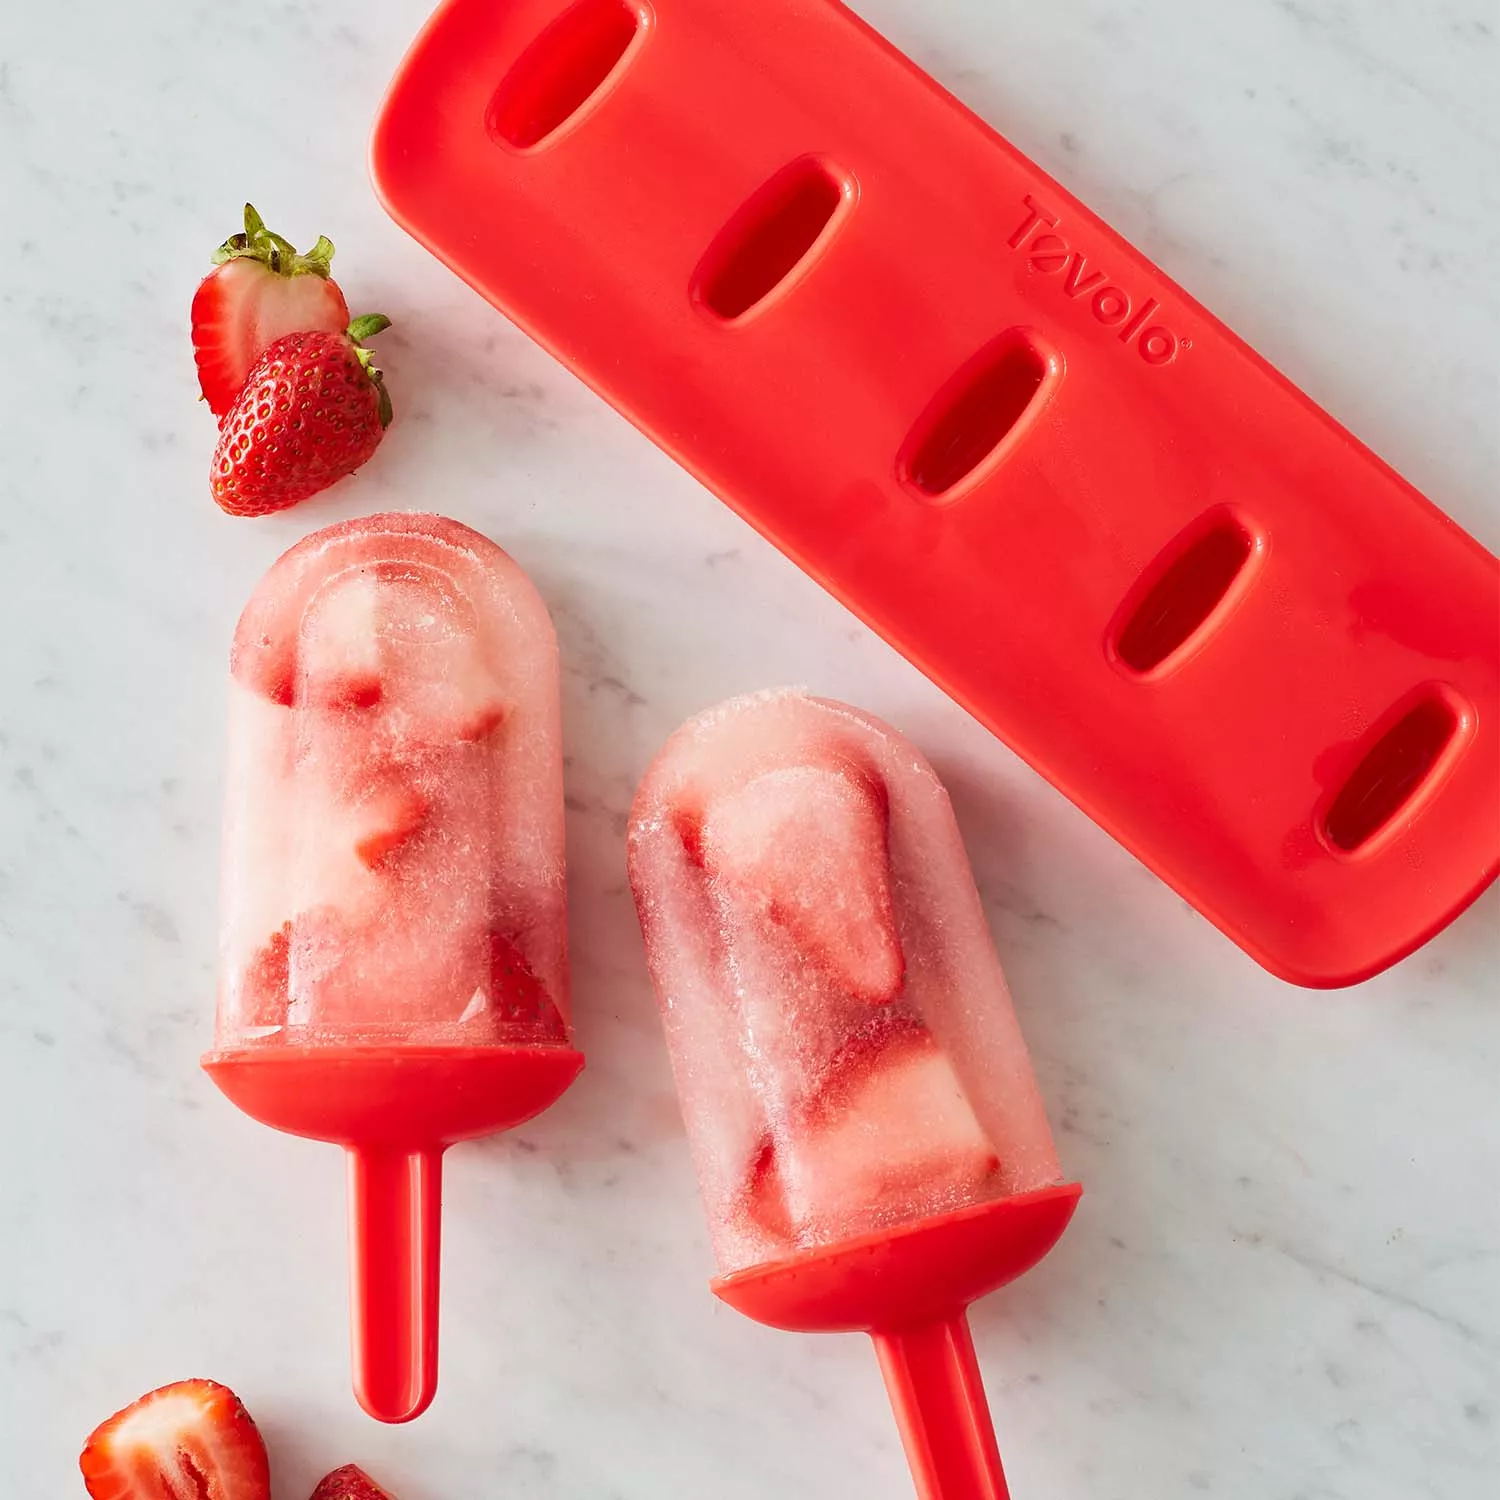  Tovolo Classic Pop Molds Popsicle Making Tray with Six